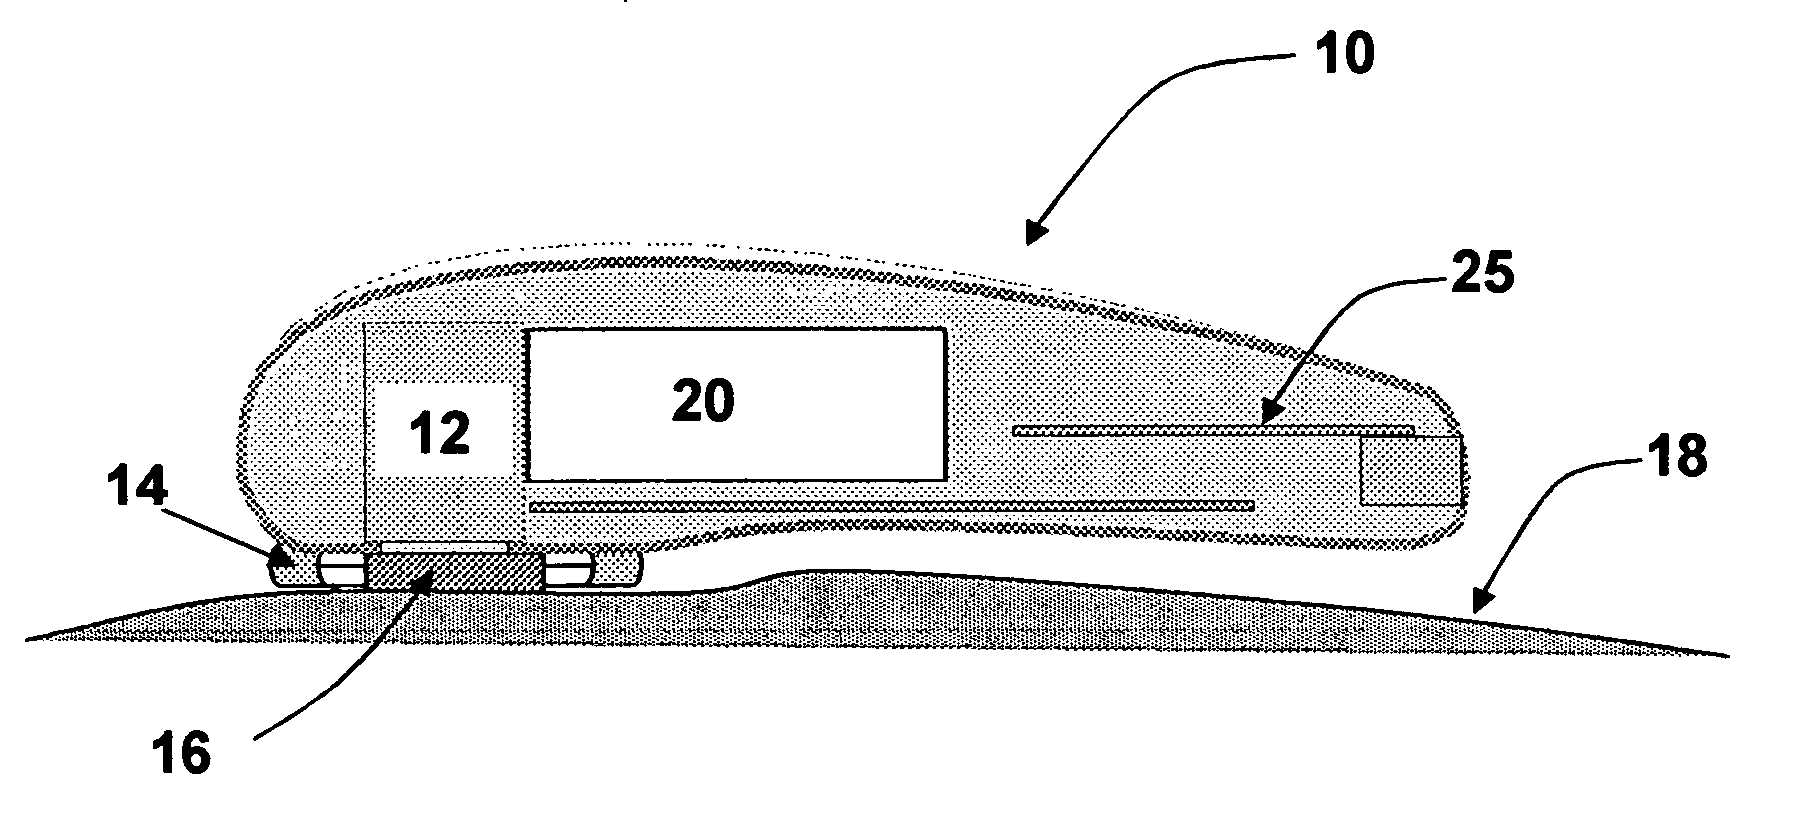 Tissue thickness measurement device